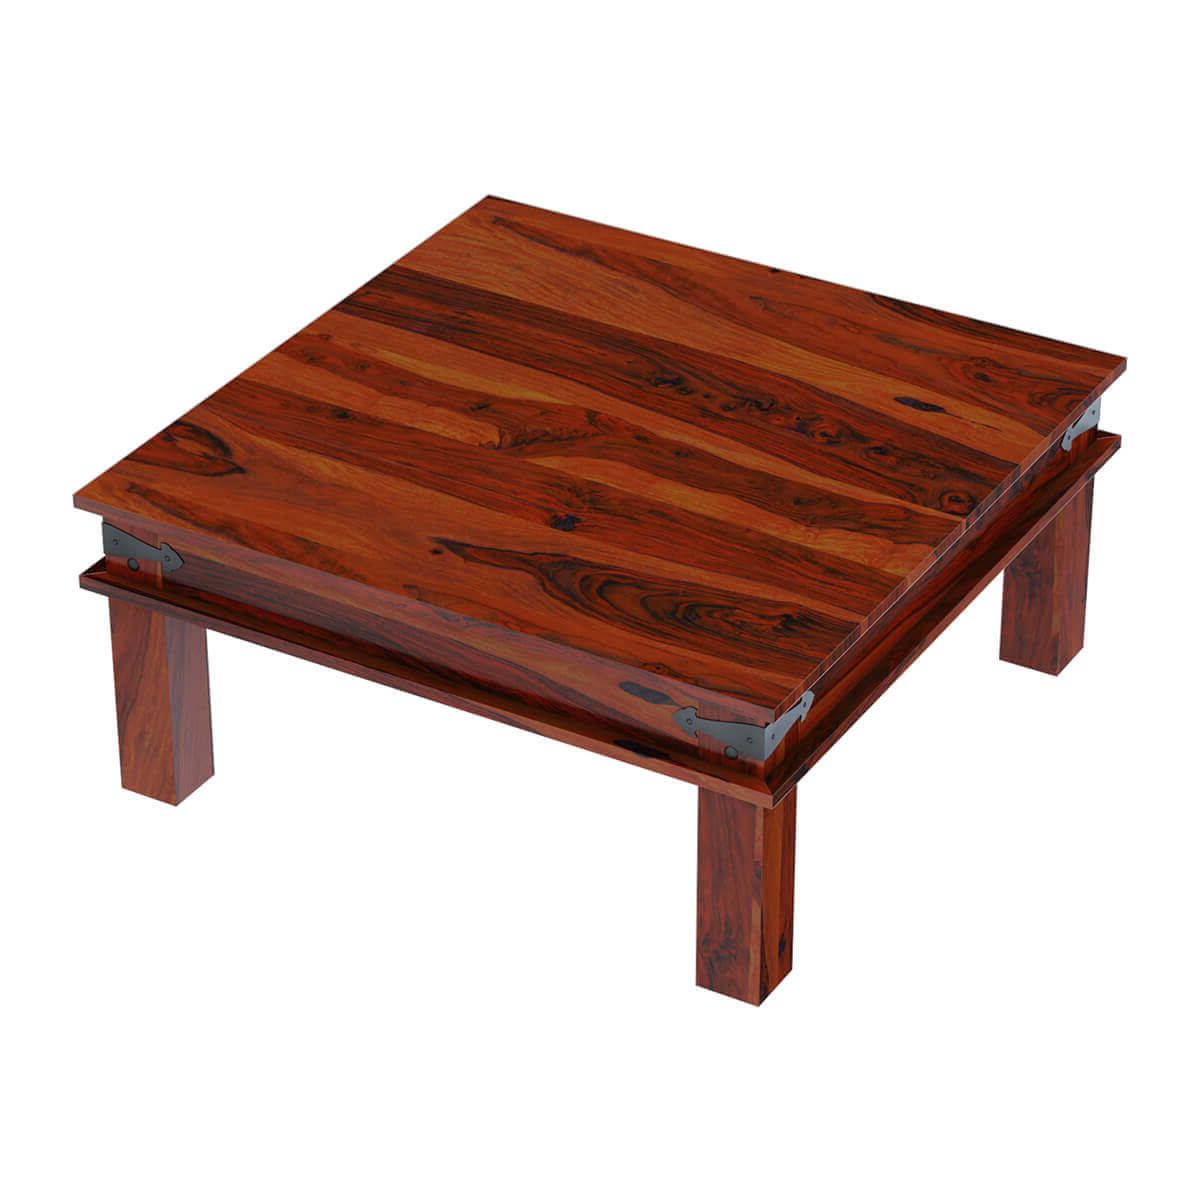 Altamont Transitional Solid Wood Square Coffee Table For Well Liked Smoke Gray Wood Square Coffee Tables (Gallery 2 of 20)